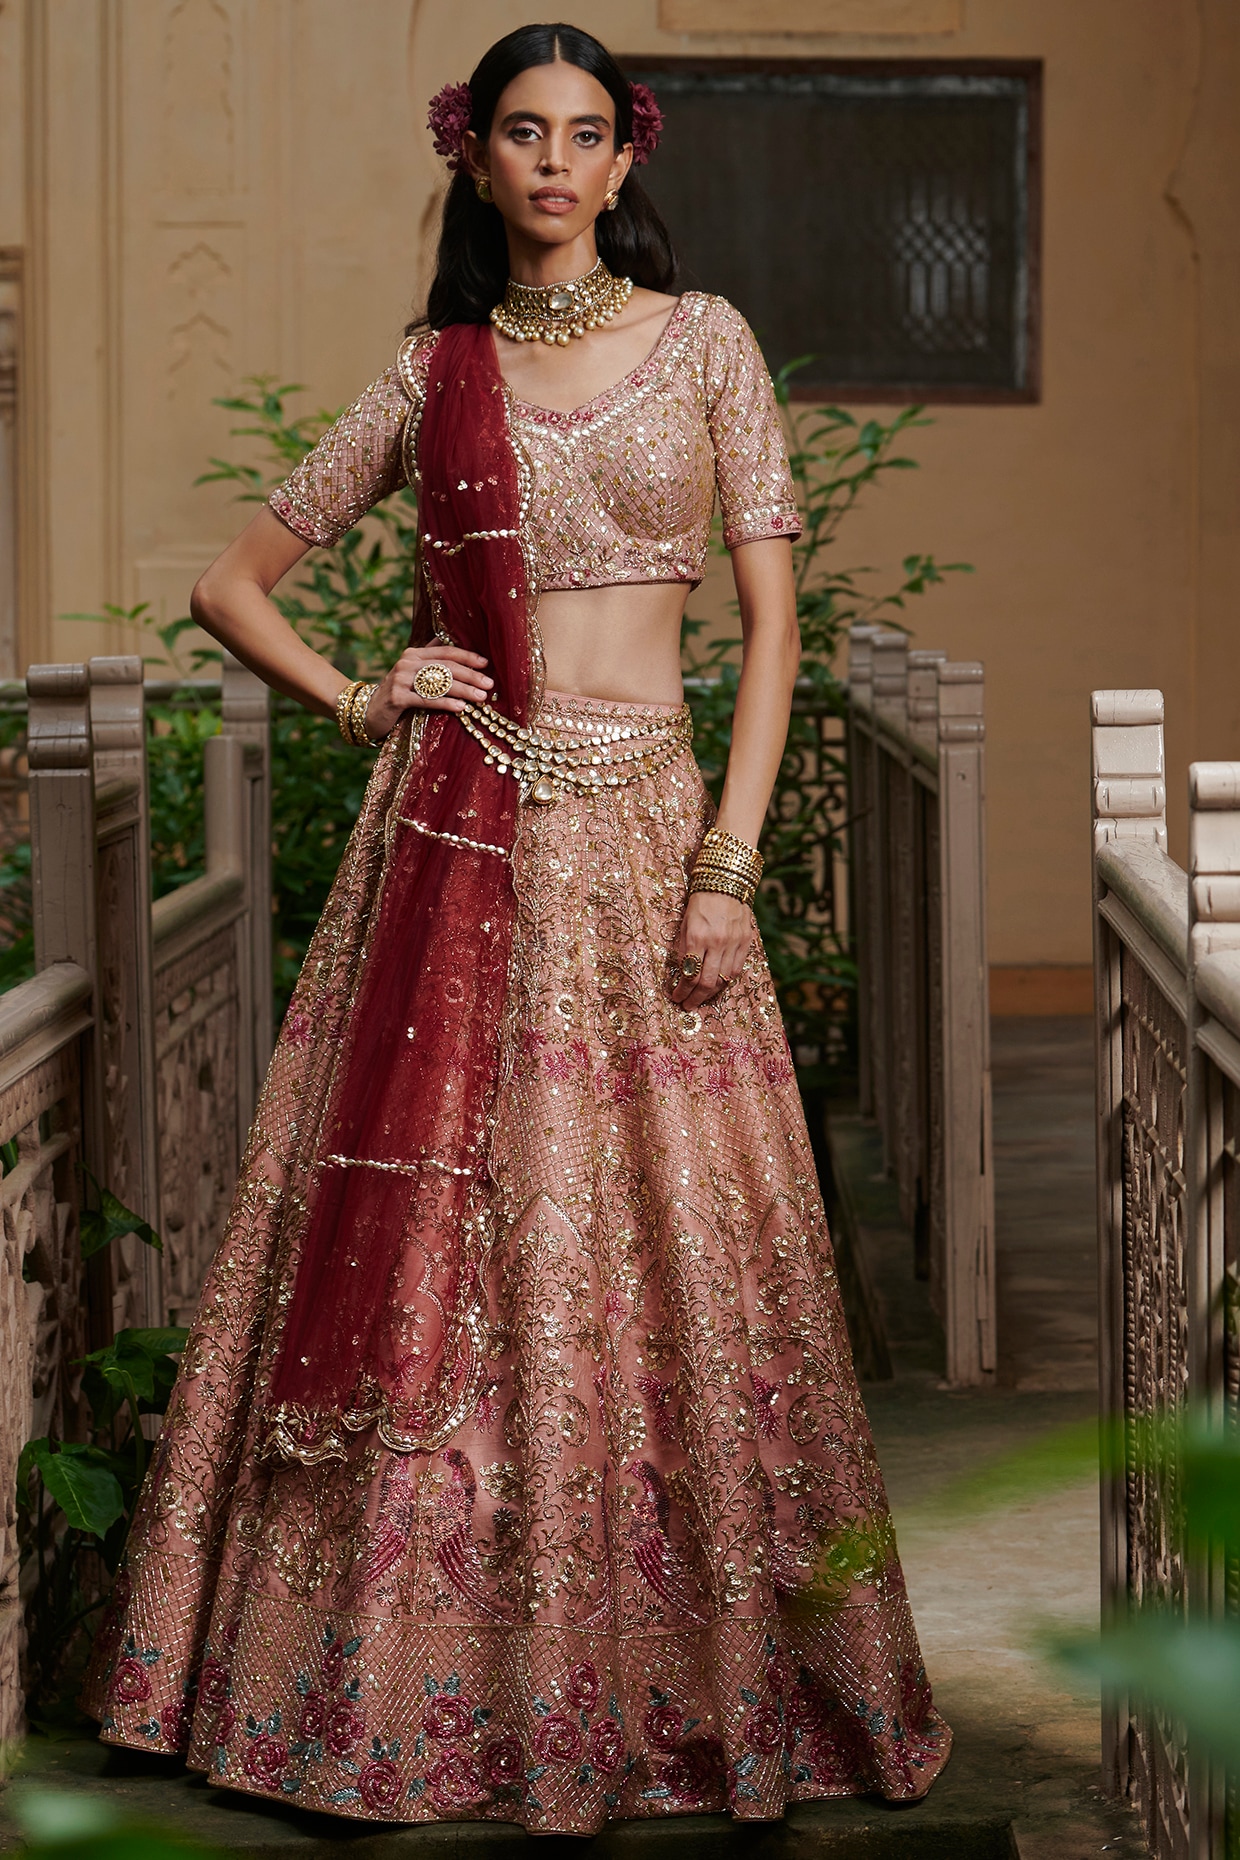 Red Lehenga | Bridal Outfit | Indian Wedding Dresses | Bridal lehenga red,  Indian bridal outfits, Indian bride outfits